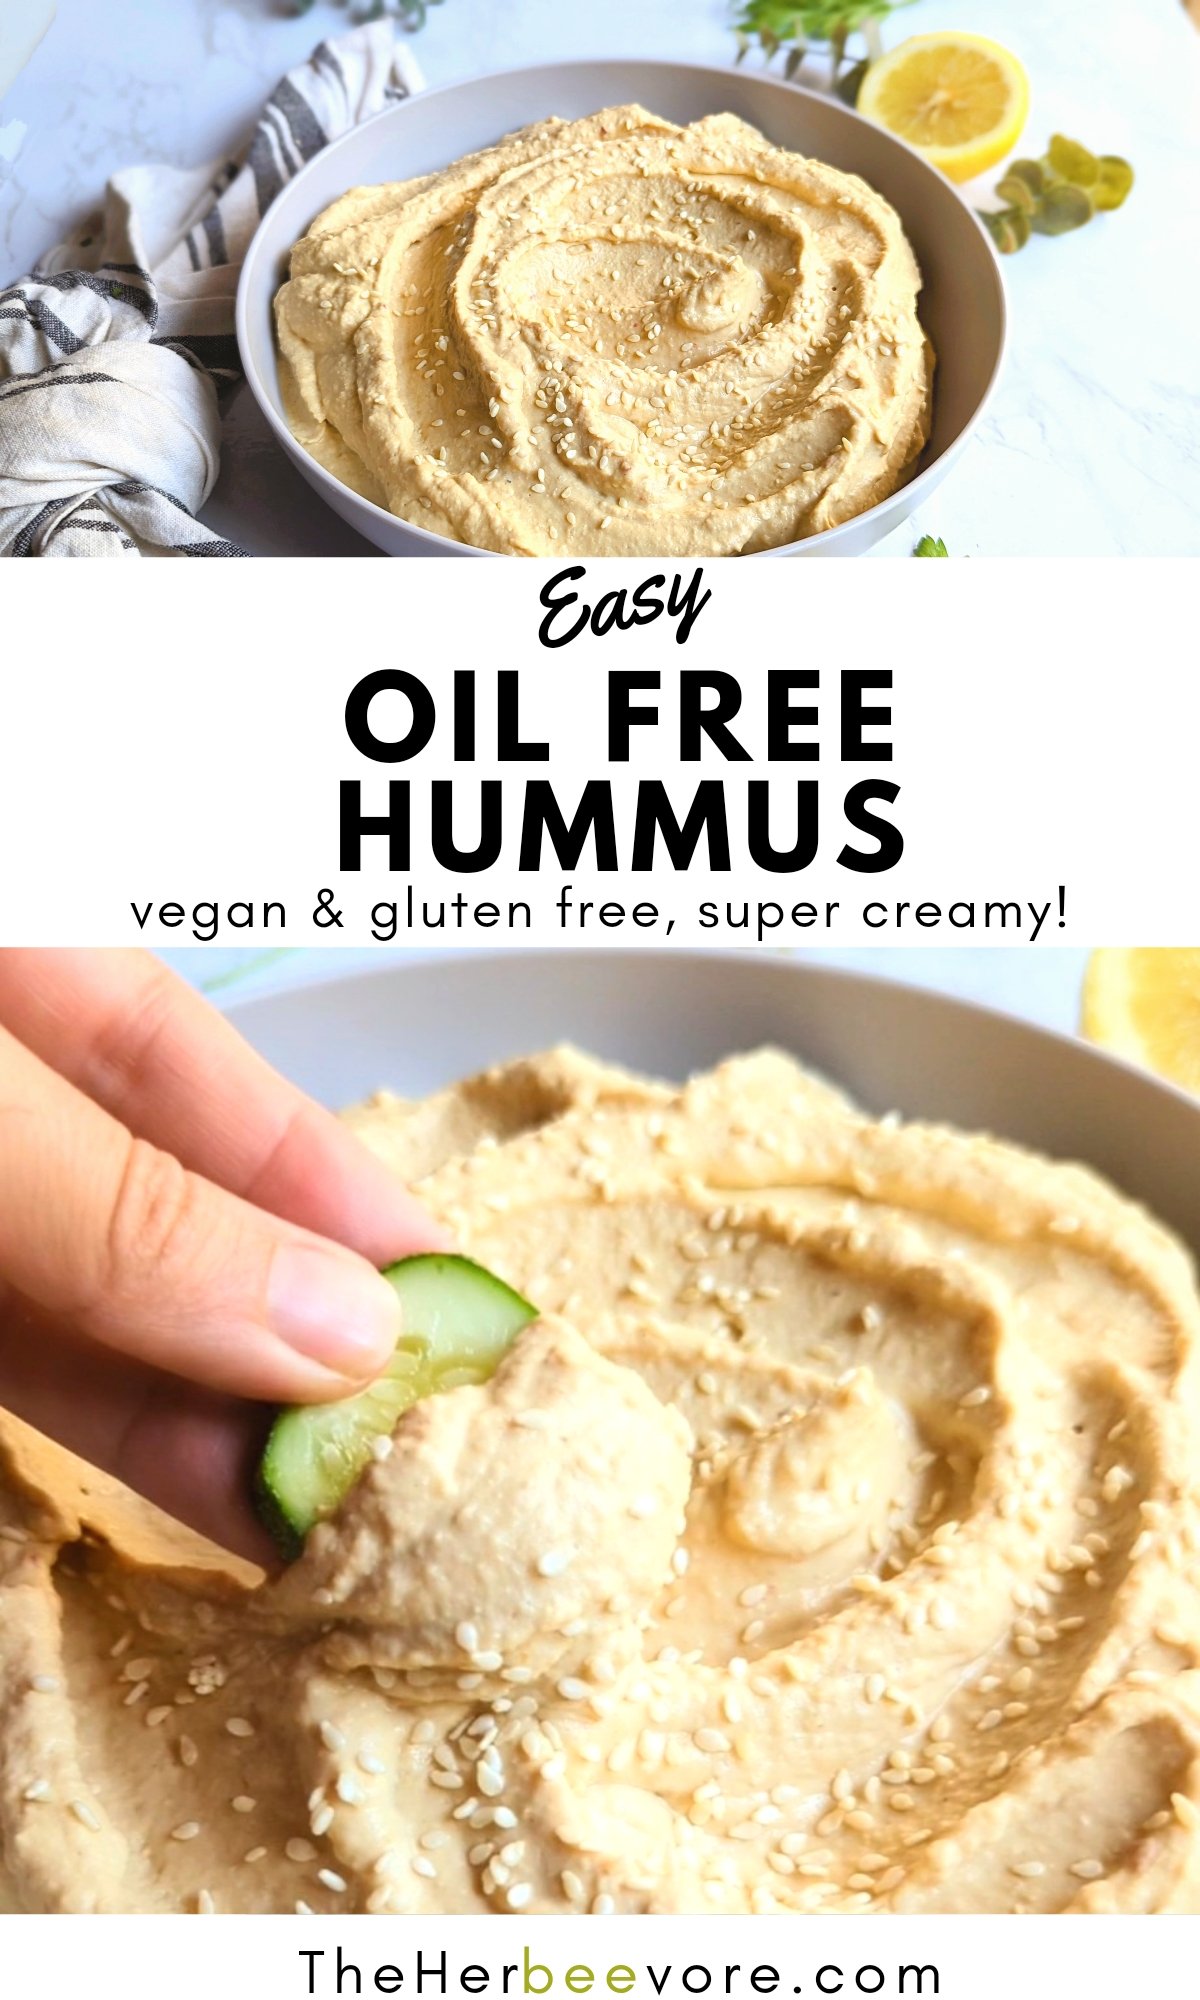 oil free hummus recipe with instant pot instructions garlic tahini spices and lemon juice